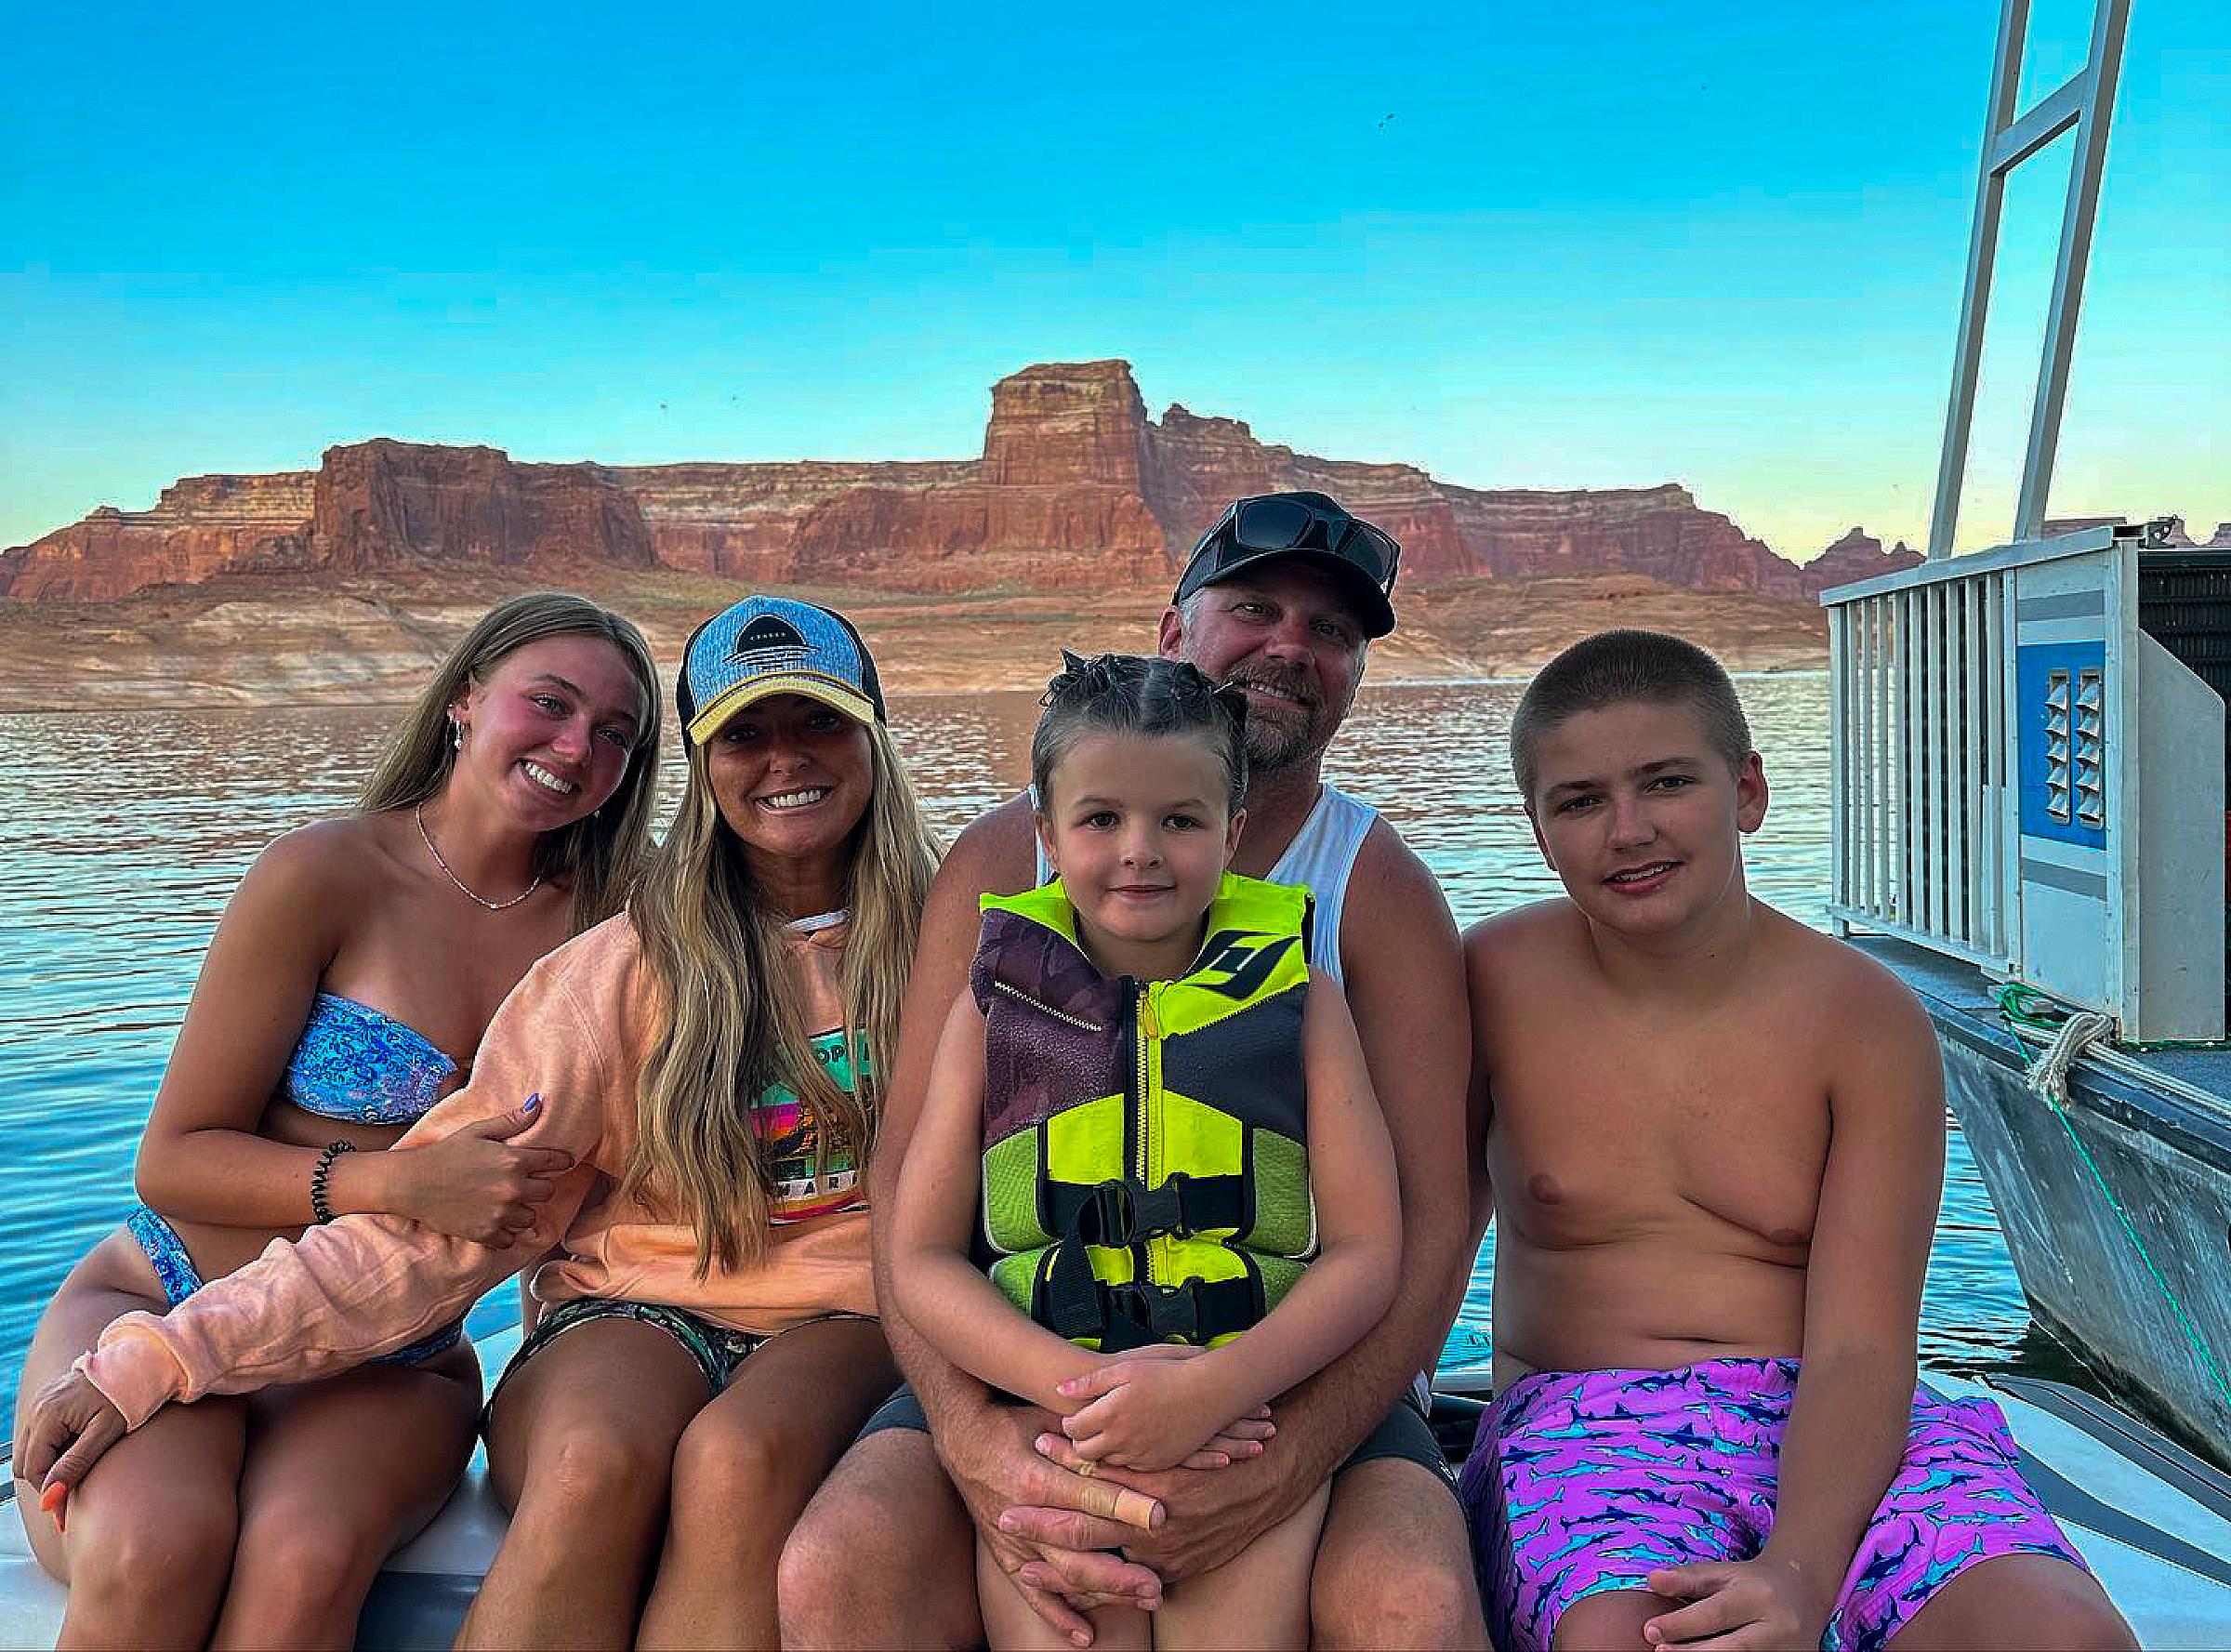 Amber vacationing with her family in Lake Powell